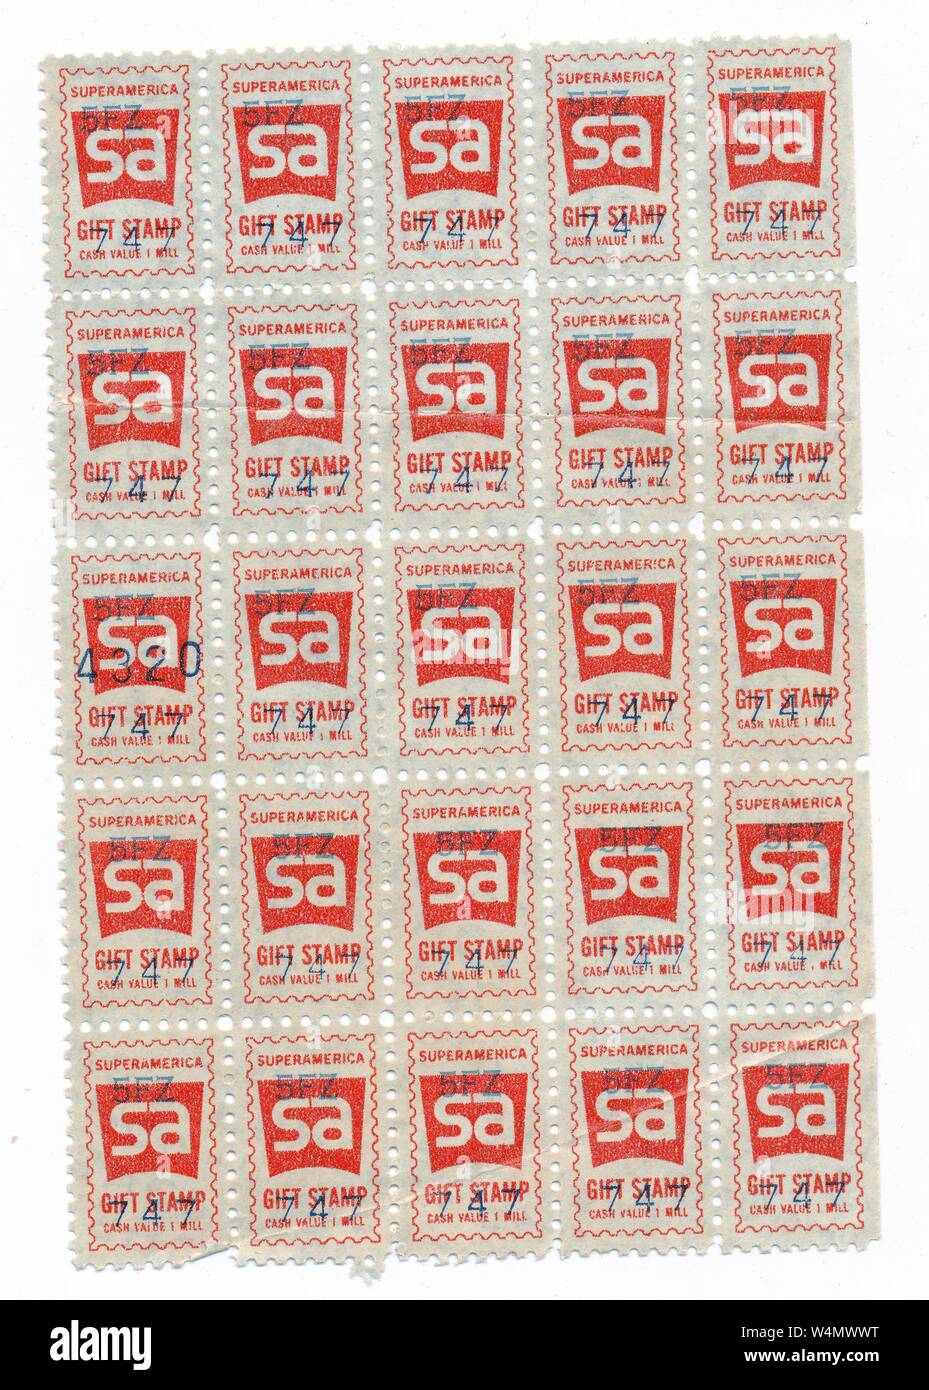 A sheet of twenty-five, trading or 'gift' stamps, issued by SuperAmerica, a gas station and convenience store company headquartered in Woodbury, Minnesota, 1965. () Stock Photo